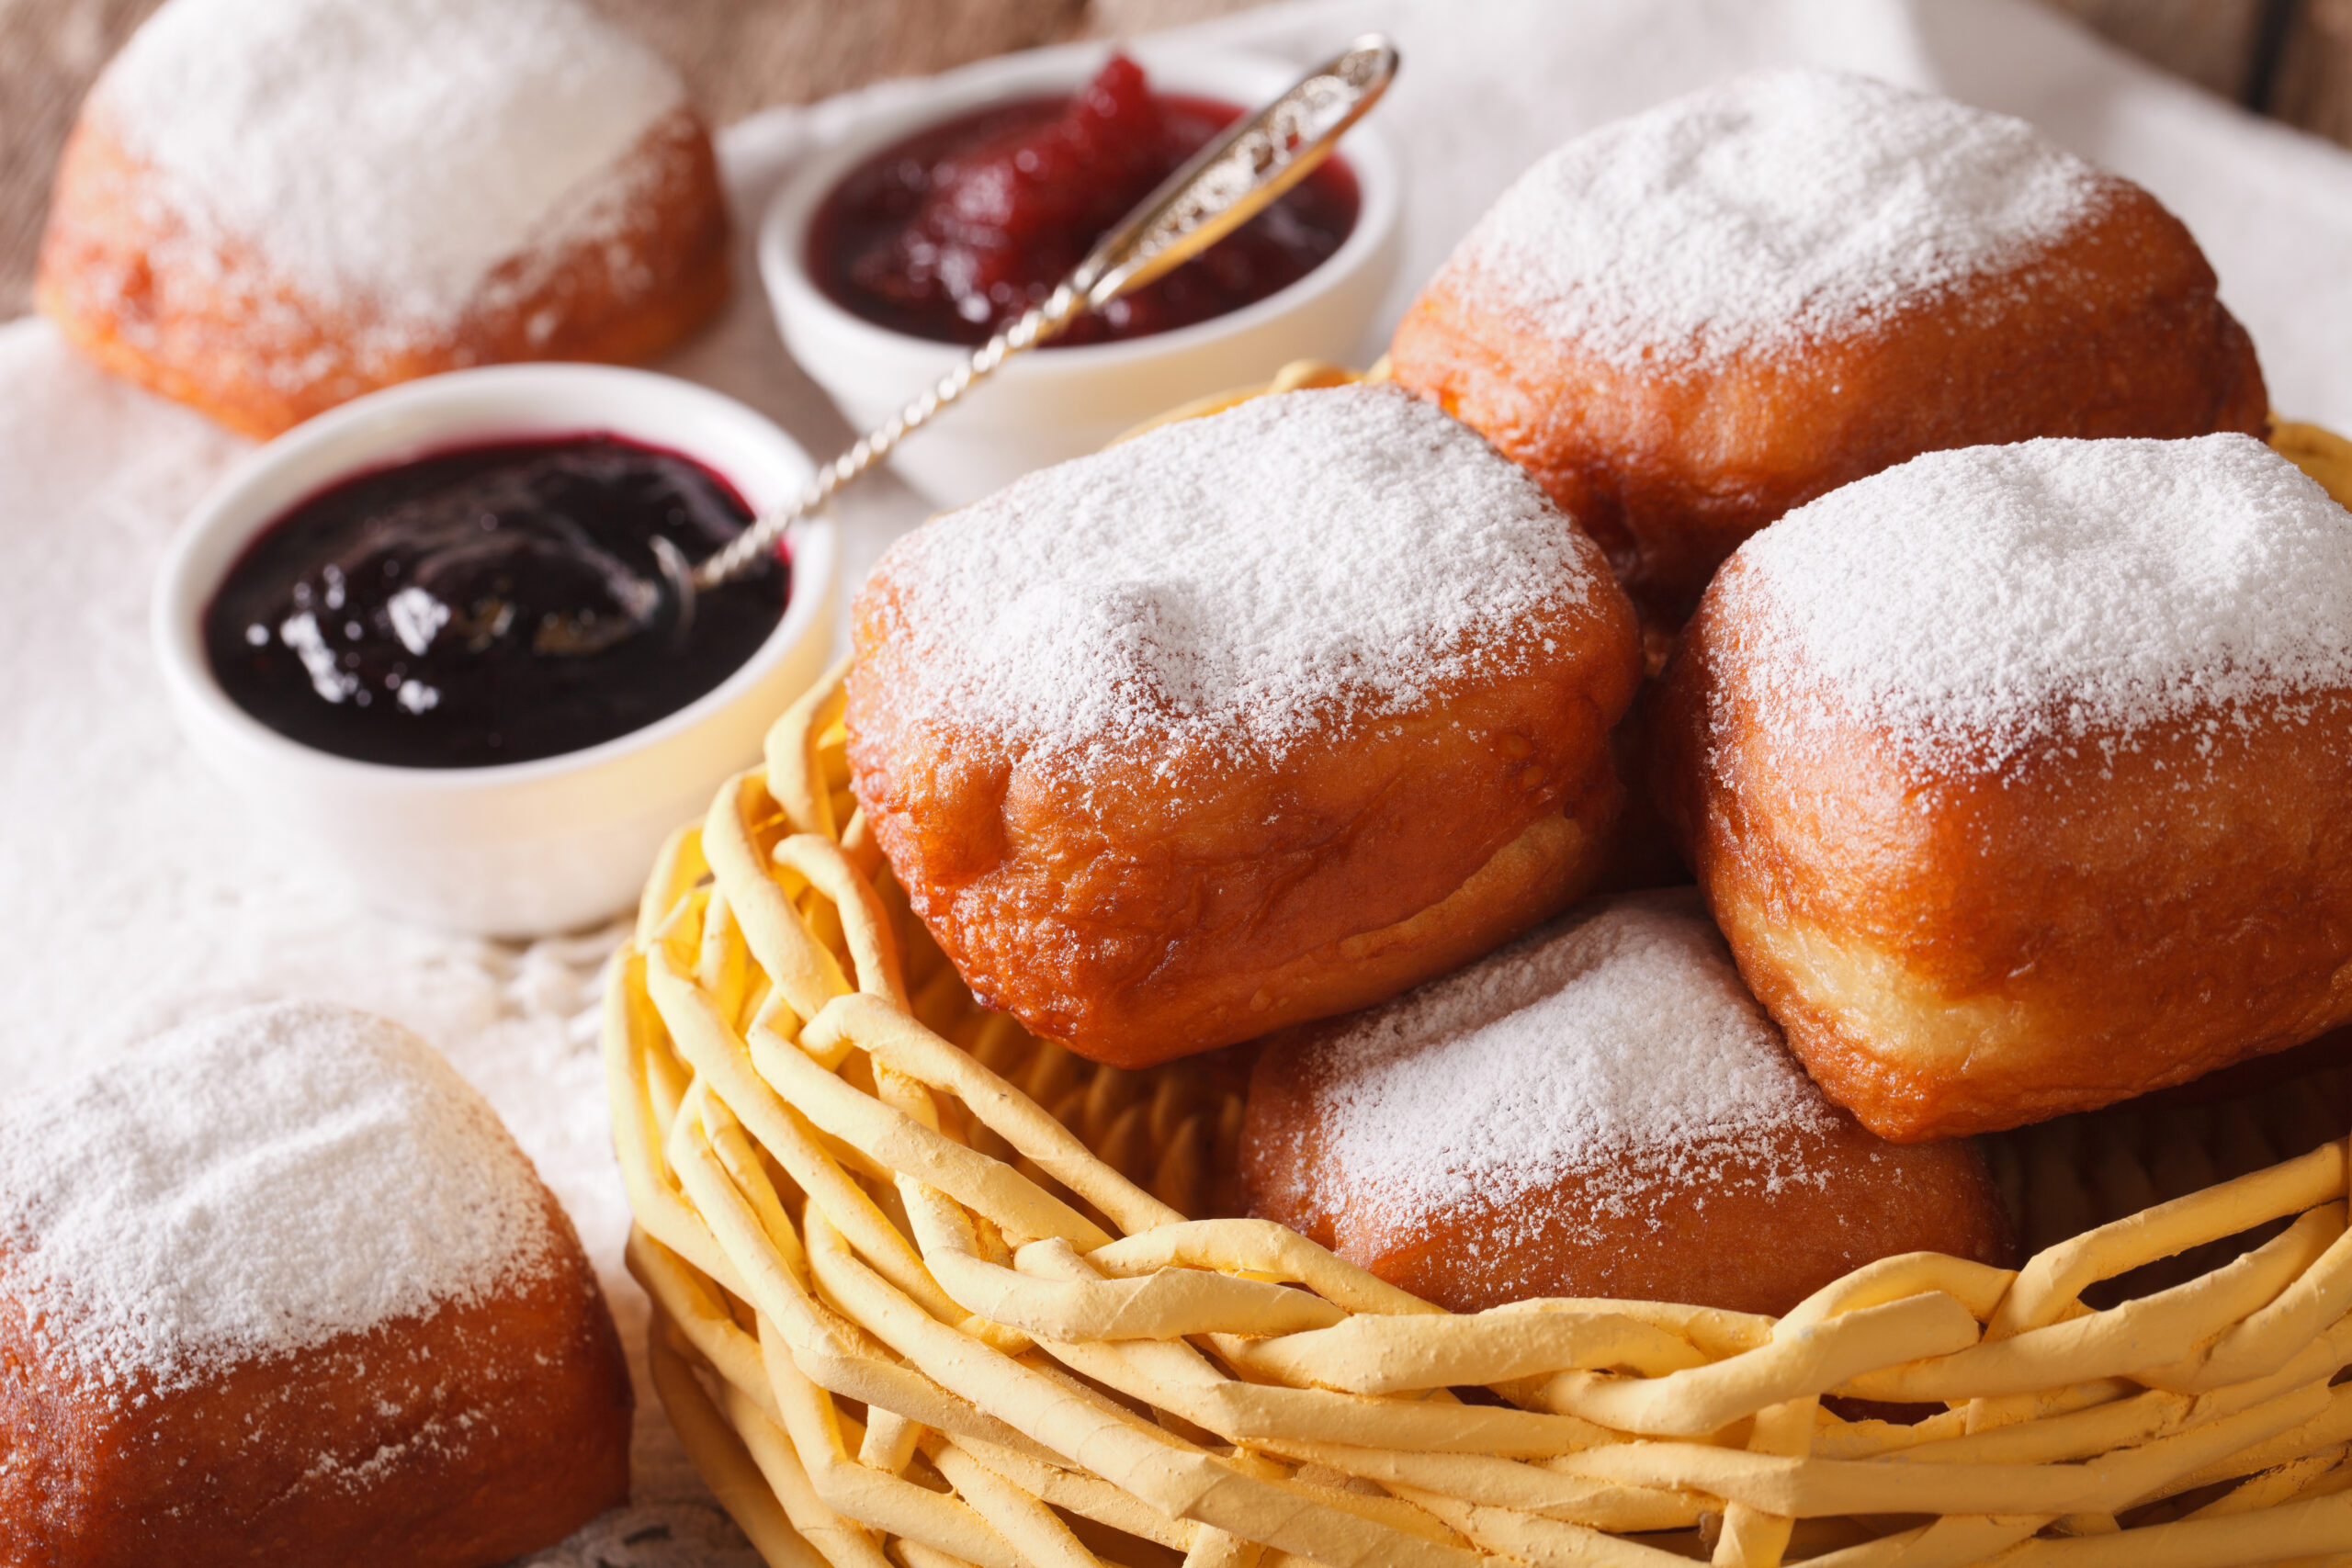 Donuts and bread with sugar powder